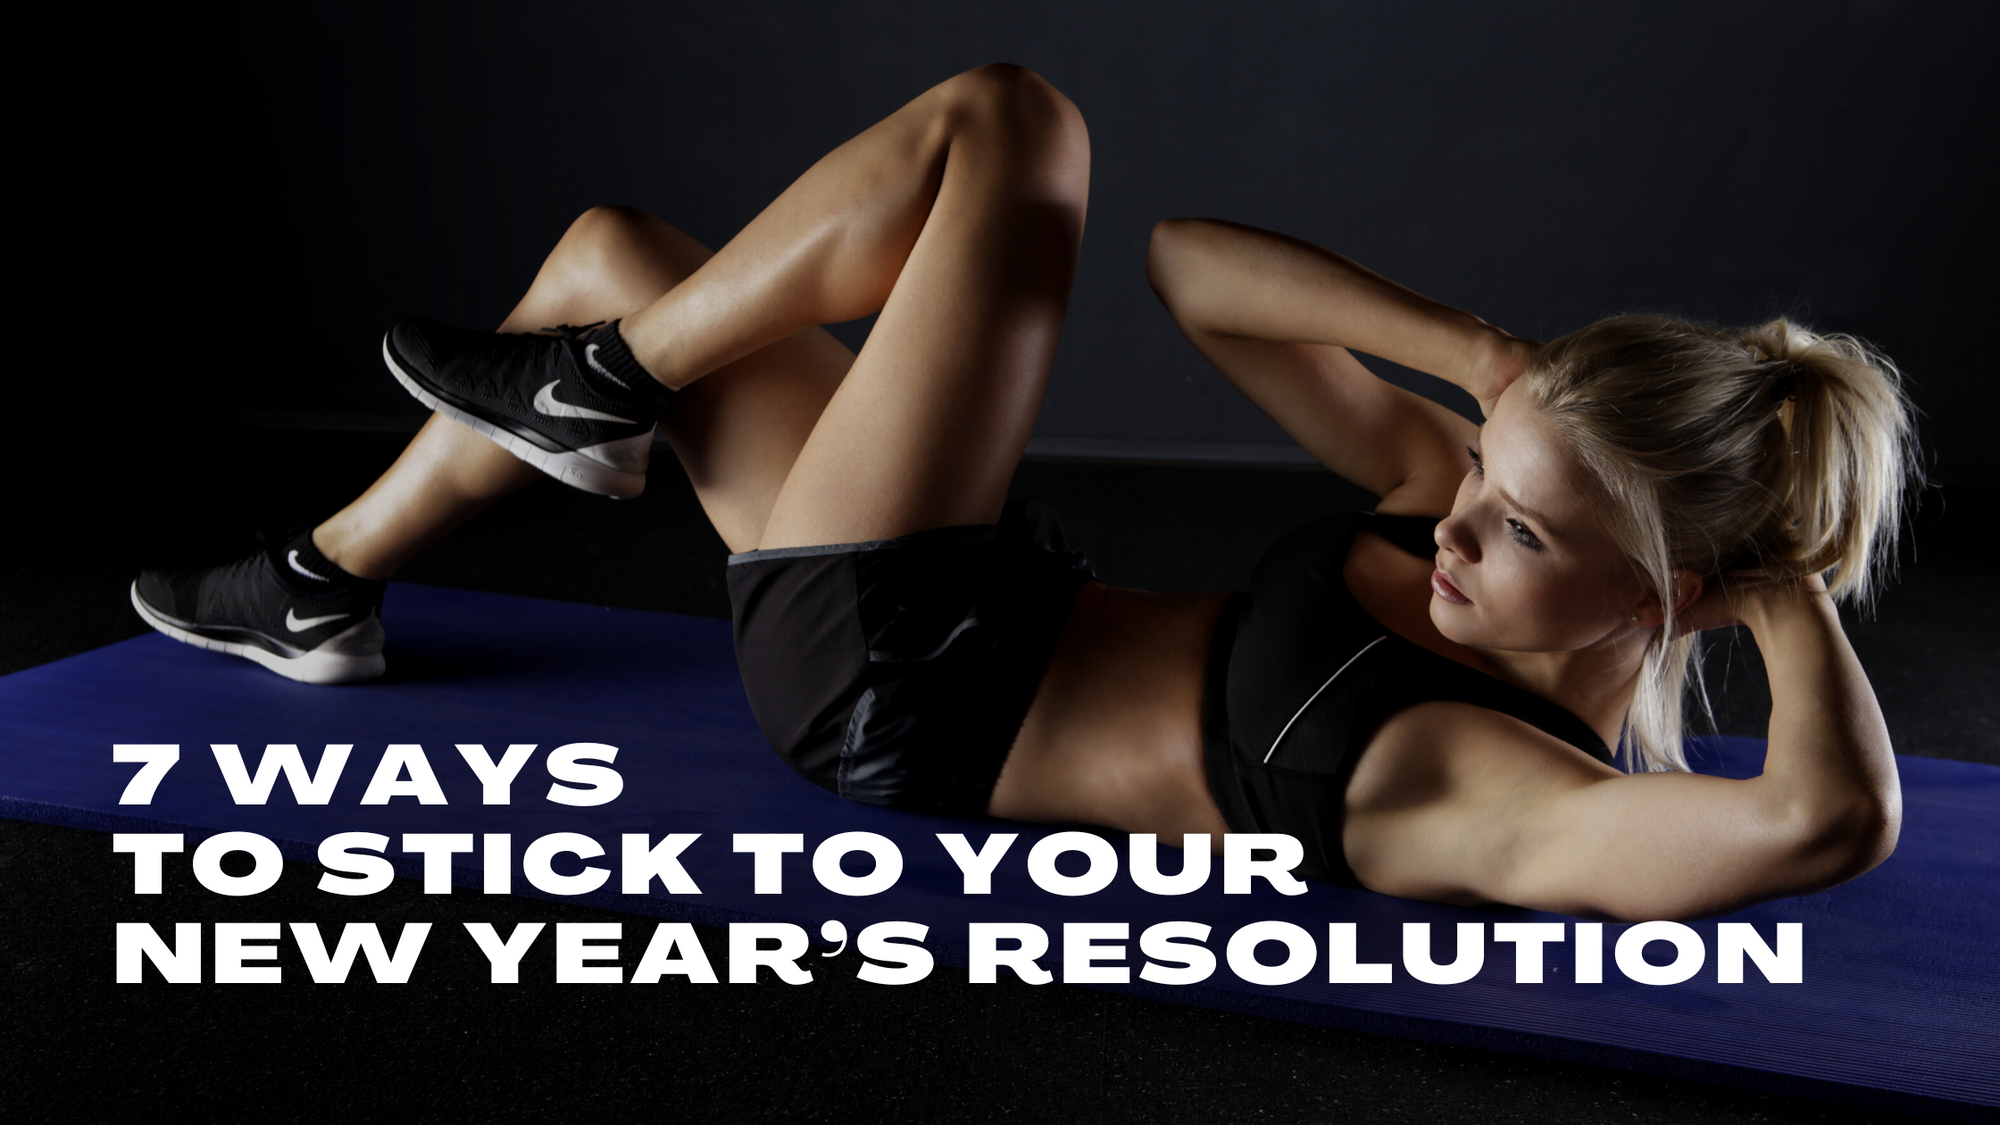 Ways to Stick to your New Year’s Resolution 